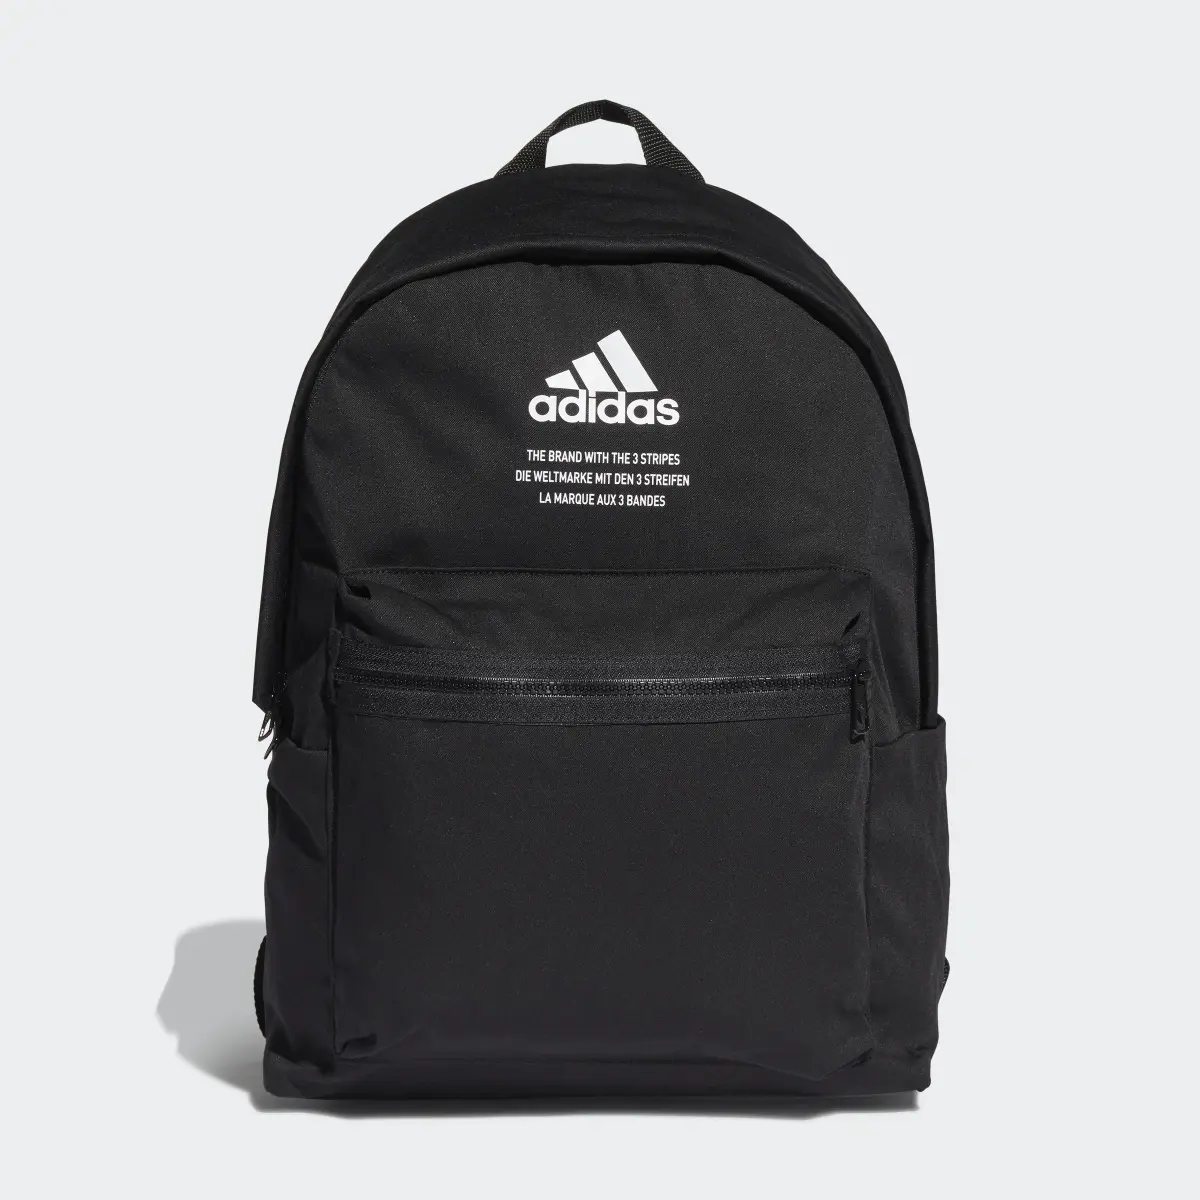 Adidas Classic Fabric Backpack. 2